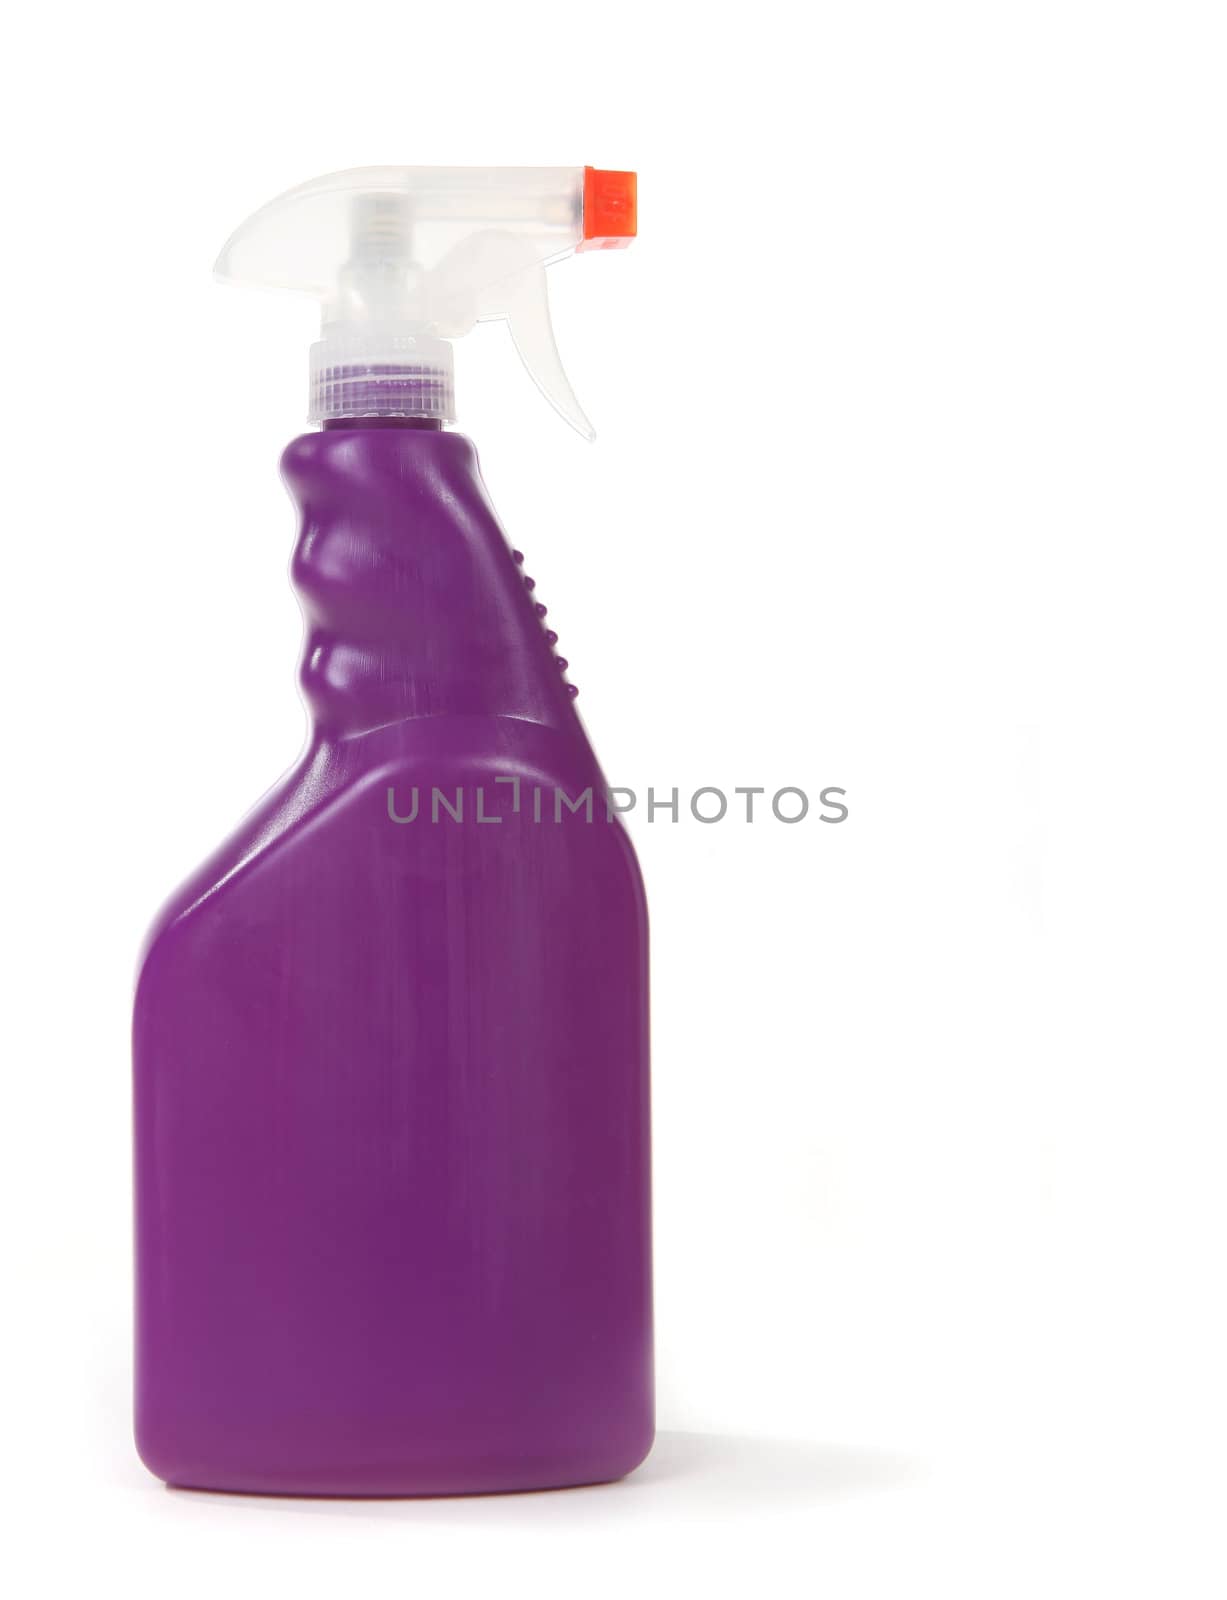 Purple Household Cleaning Bottle With Copy Space on White Background